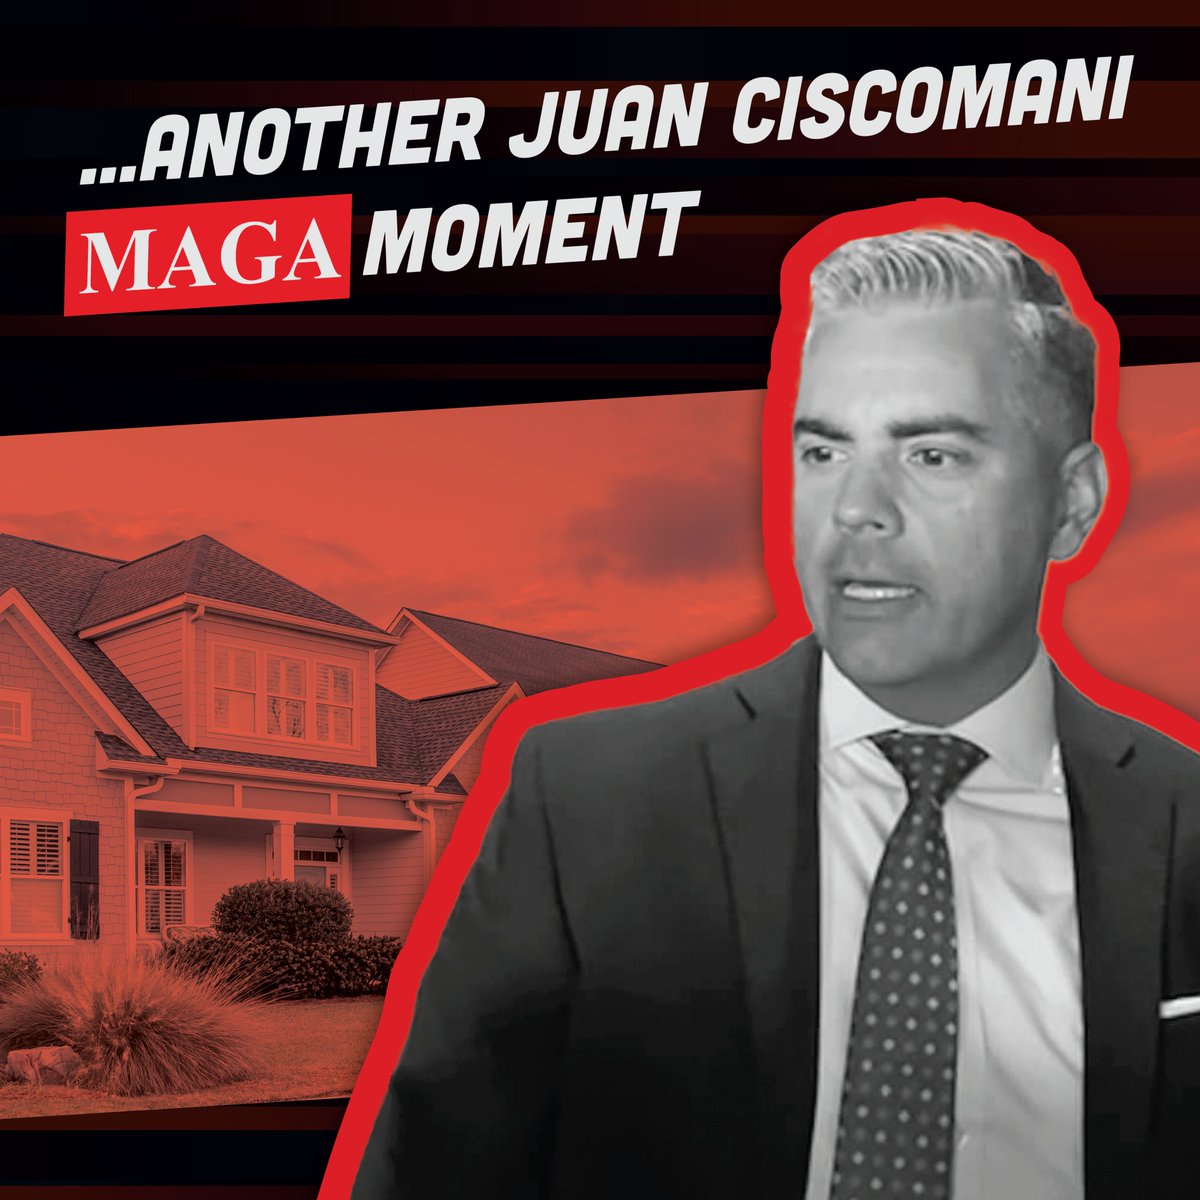 My opponent, Juan Ciscomani, has voted to gut funding for rental assistance programs and cut support for direct housing loans — while accepting tens of thousands of dollars from major residential apartment landlords. #AZ06 deserves better.